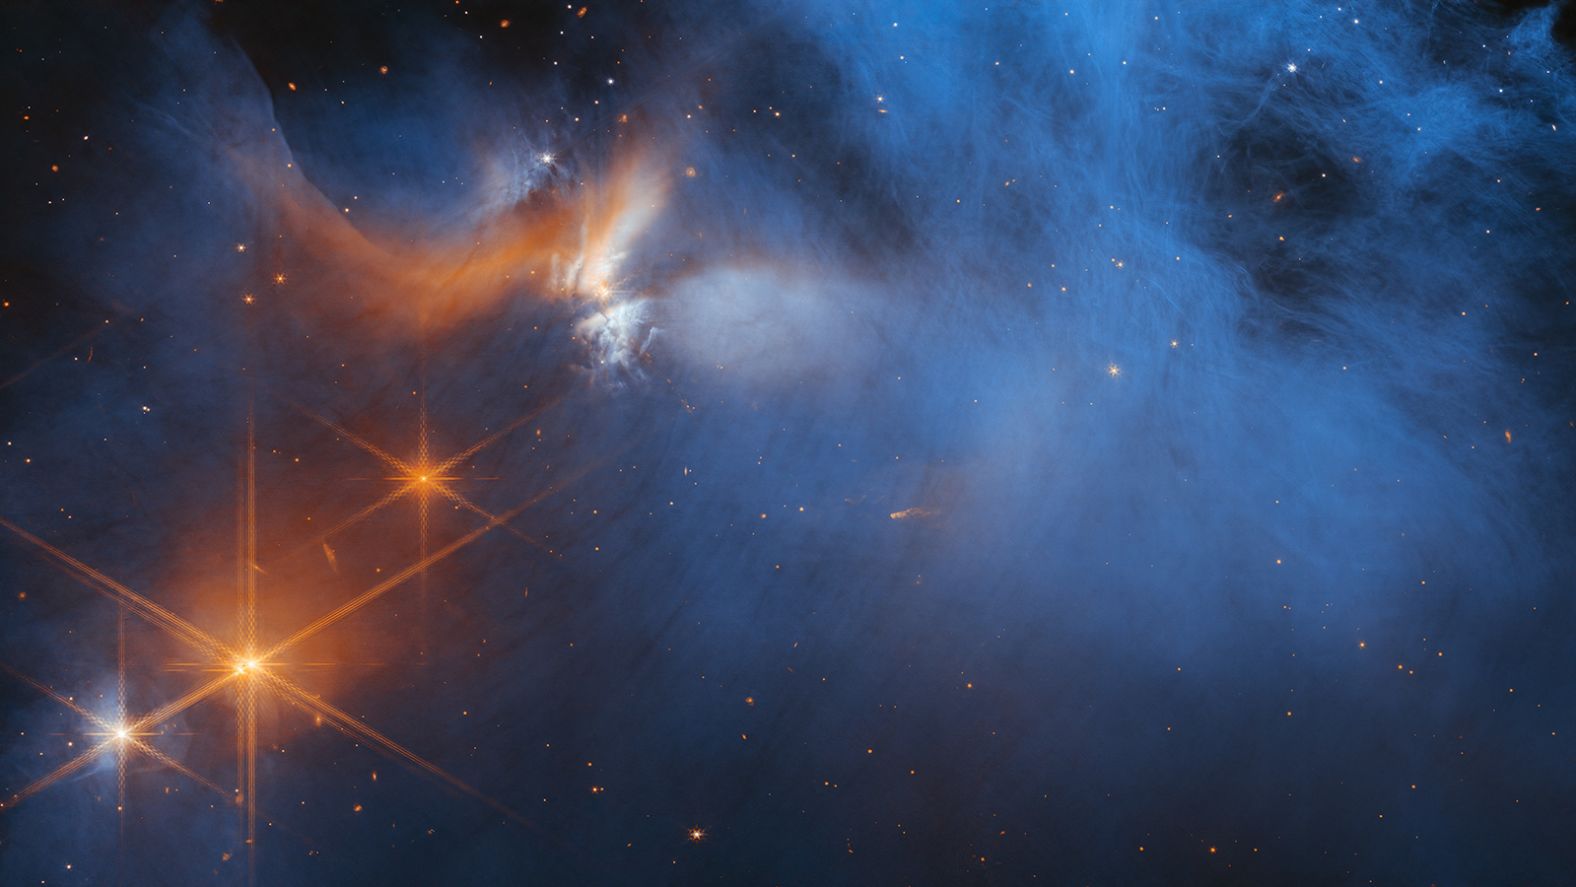 Stars shine through the hazy material of the Chamaeleon 1 dark molecular cloud, which is 630 light-years away from Earth. The image, <a href="https://www.cnn.com/2023/01/23/world/webb-telescope-ice-chemistry-scn/index.html" target="_blank">observed with the James Webb Space Telescope</a>, was released on Monday, January 23.